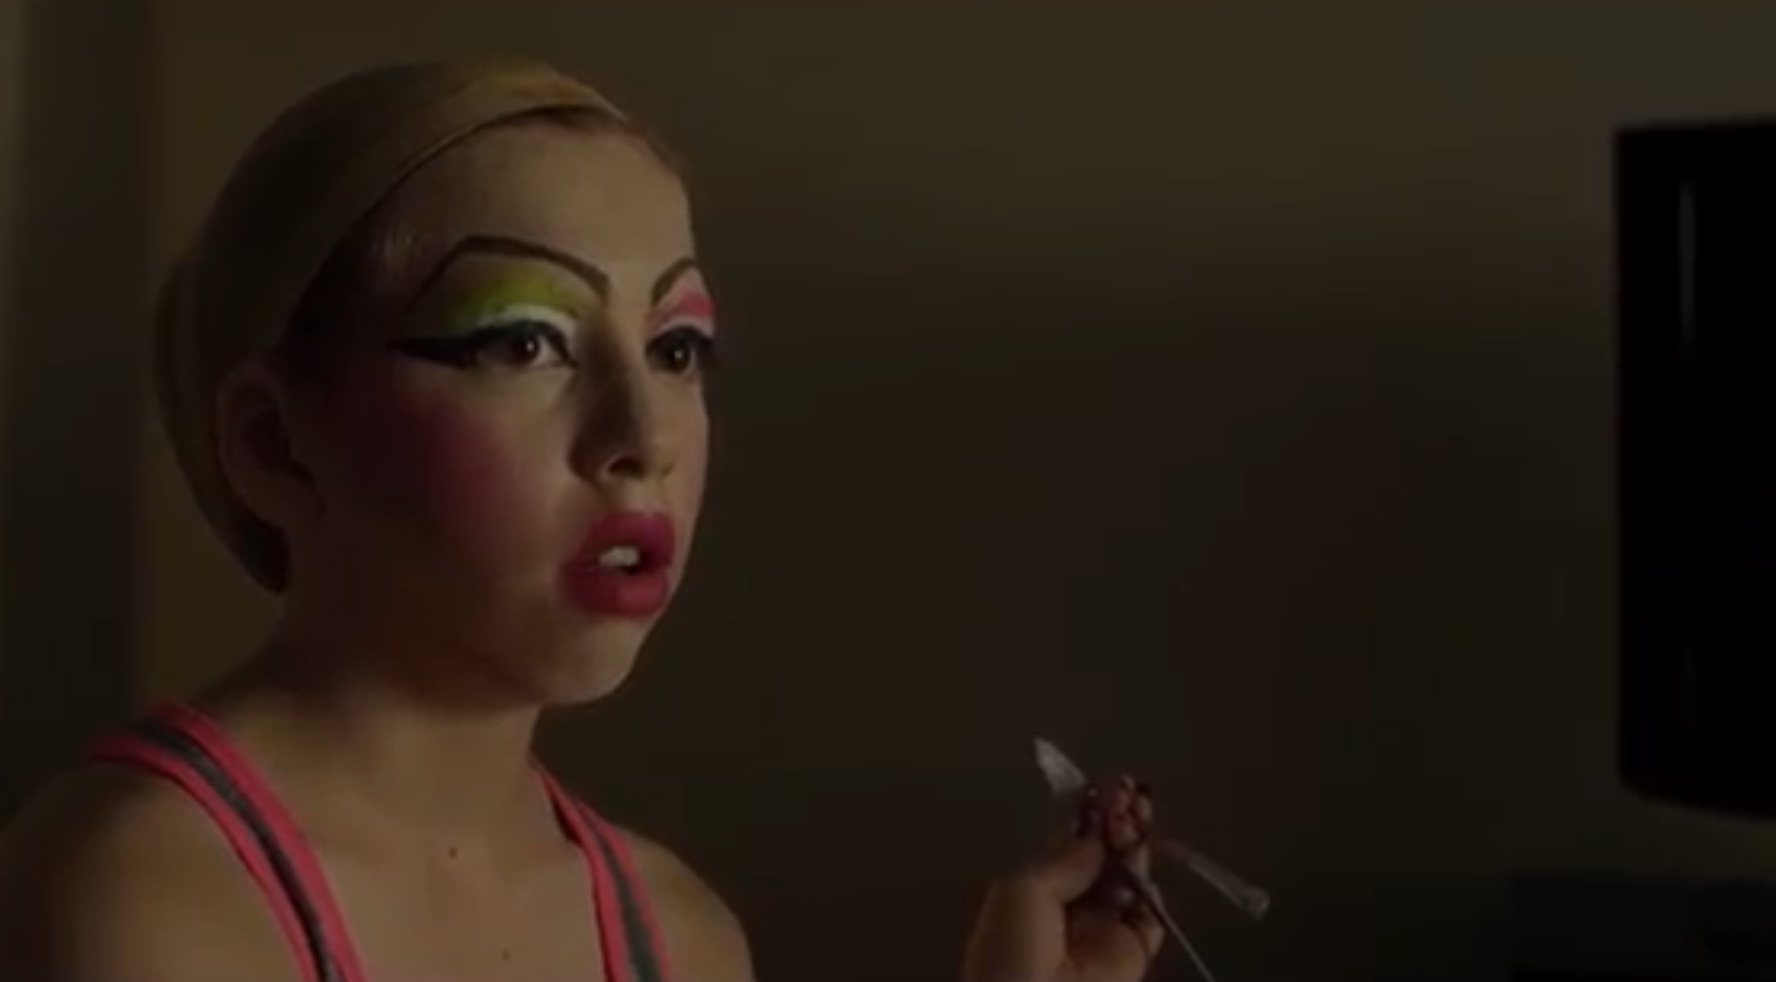 A scene from the CBC documentary “Drag Kids,” which aired July 25, 2019. YouTube screenshot.